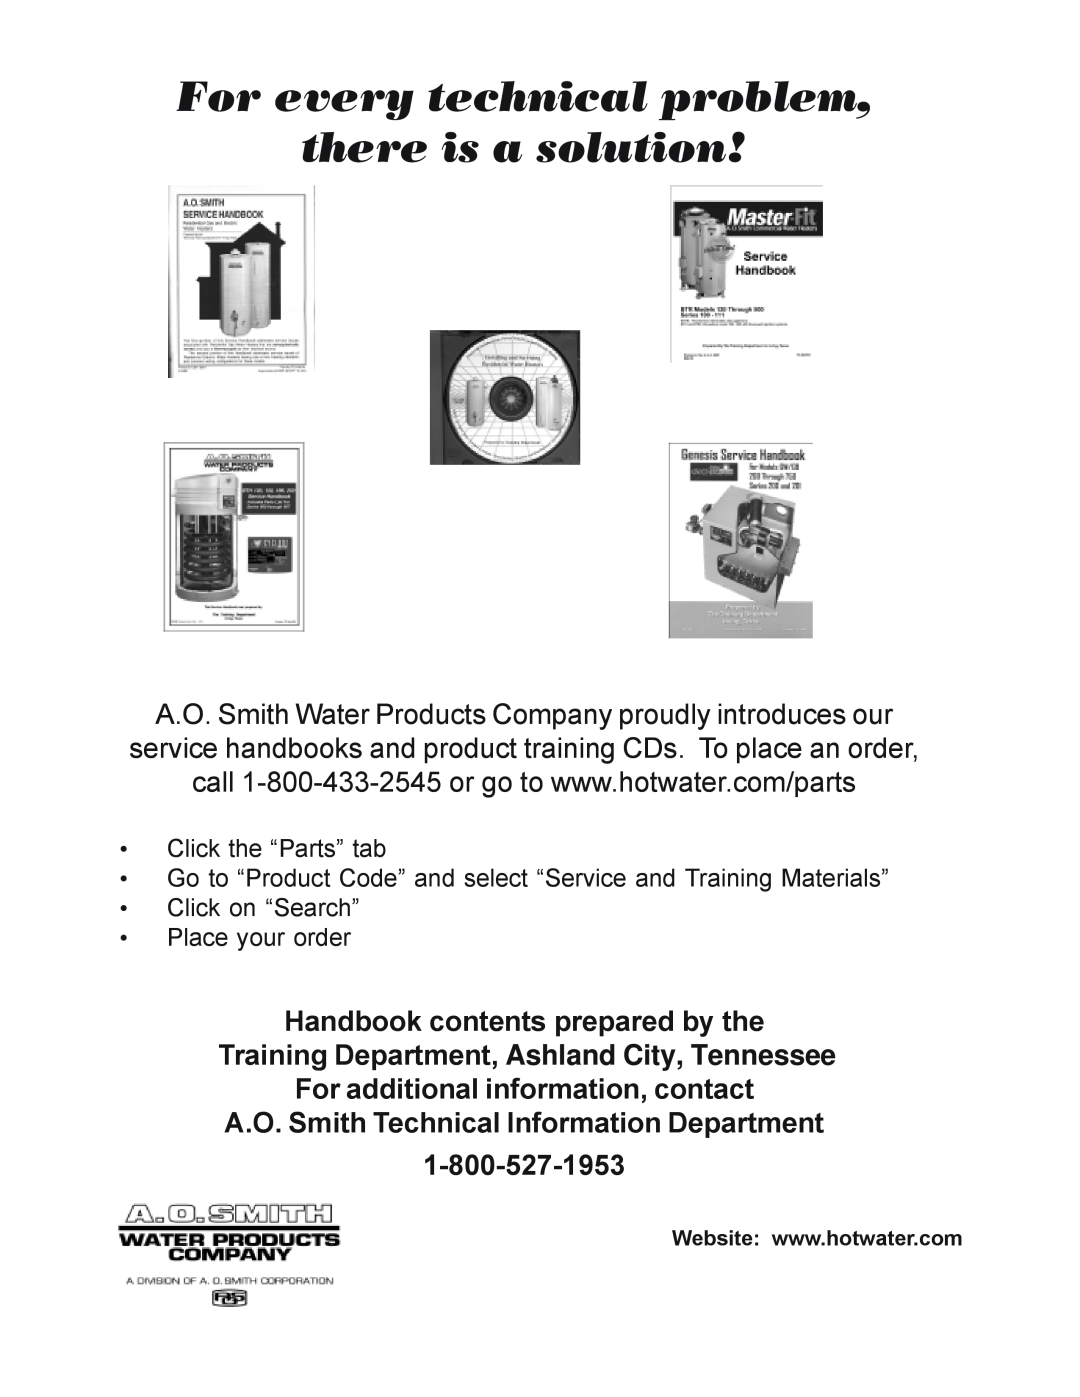 A.O. Smith TC-049-R2 manual For every technical problem there is a solution, For additional information, contact 